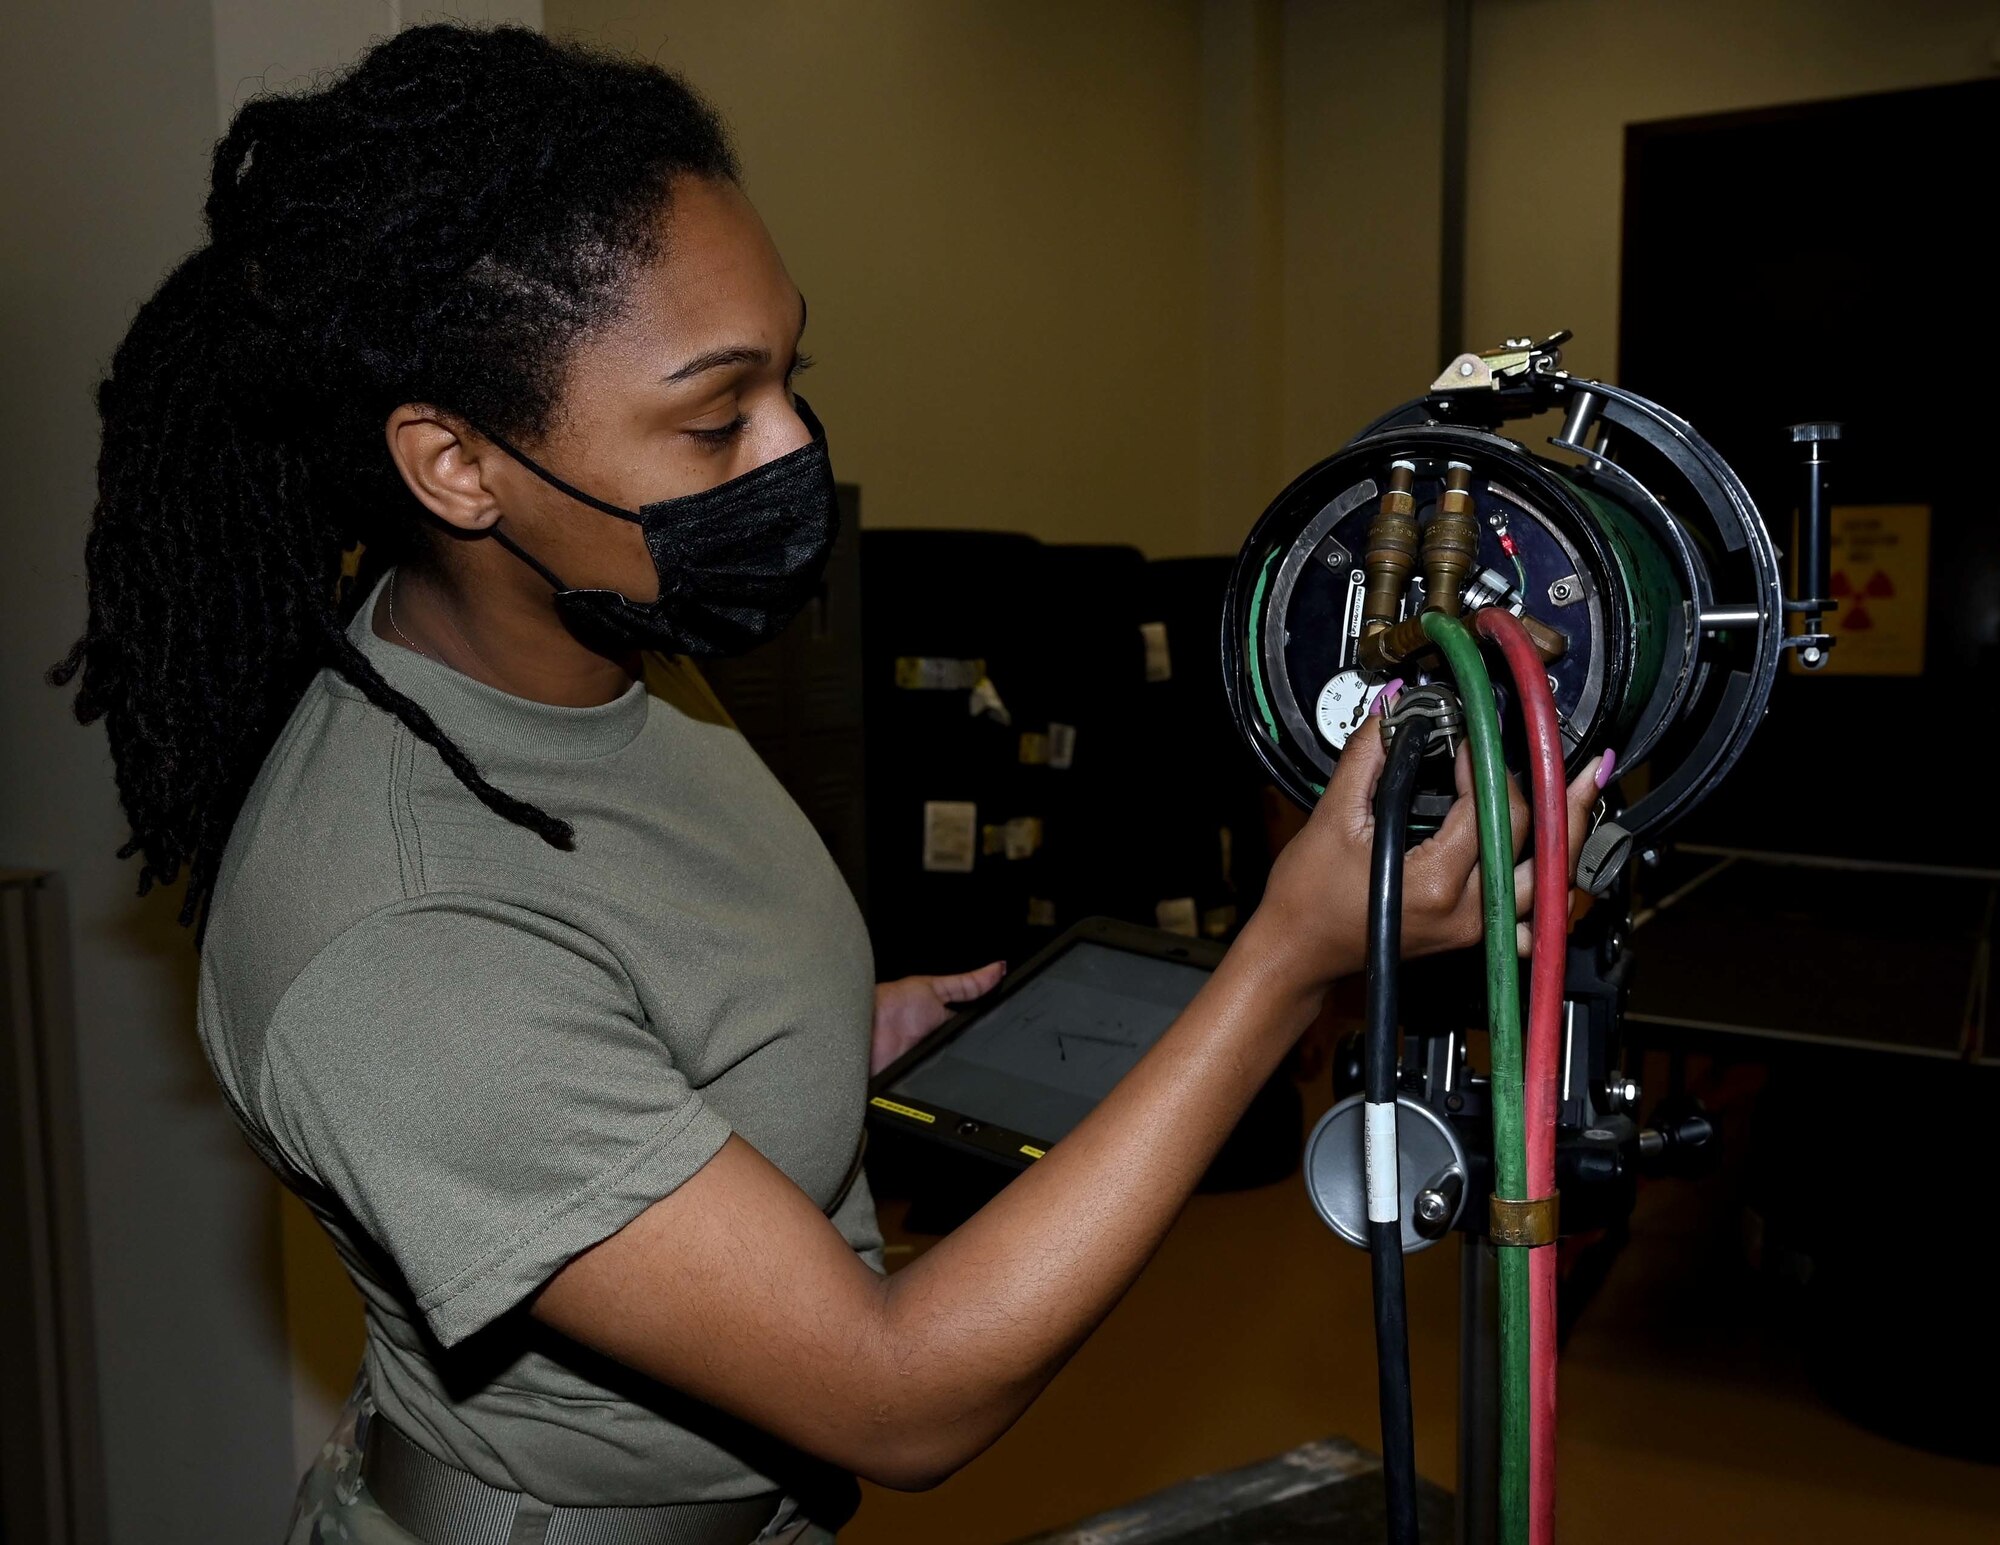 Senior Airman Treashear Britt, a nondestructive inspection technician with the 908th Maintenance Squadron, plugs in a chord to the x-ray imaging system.